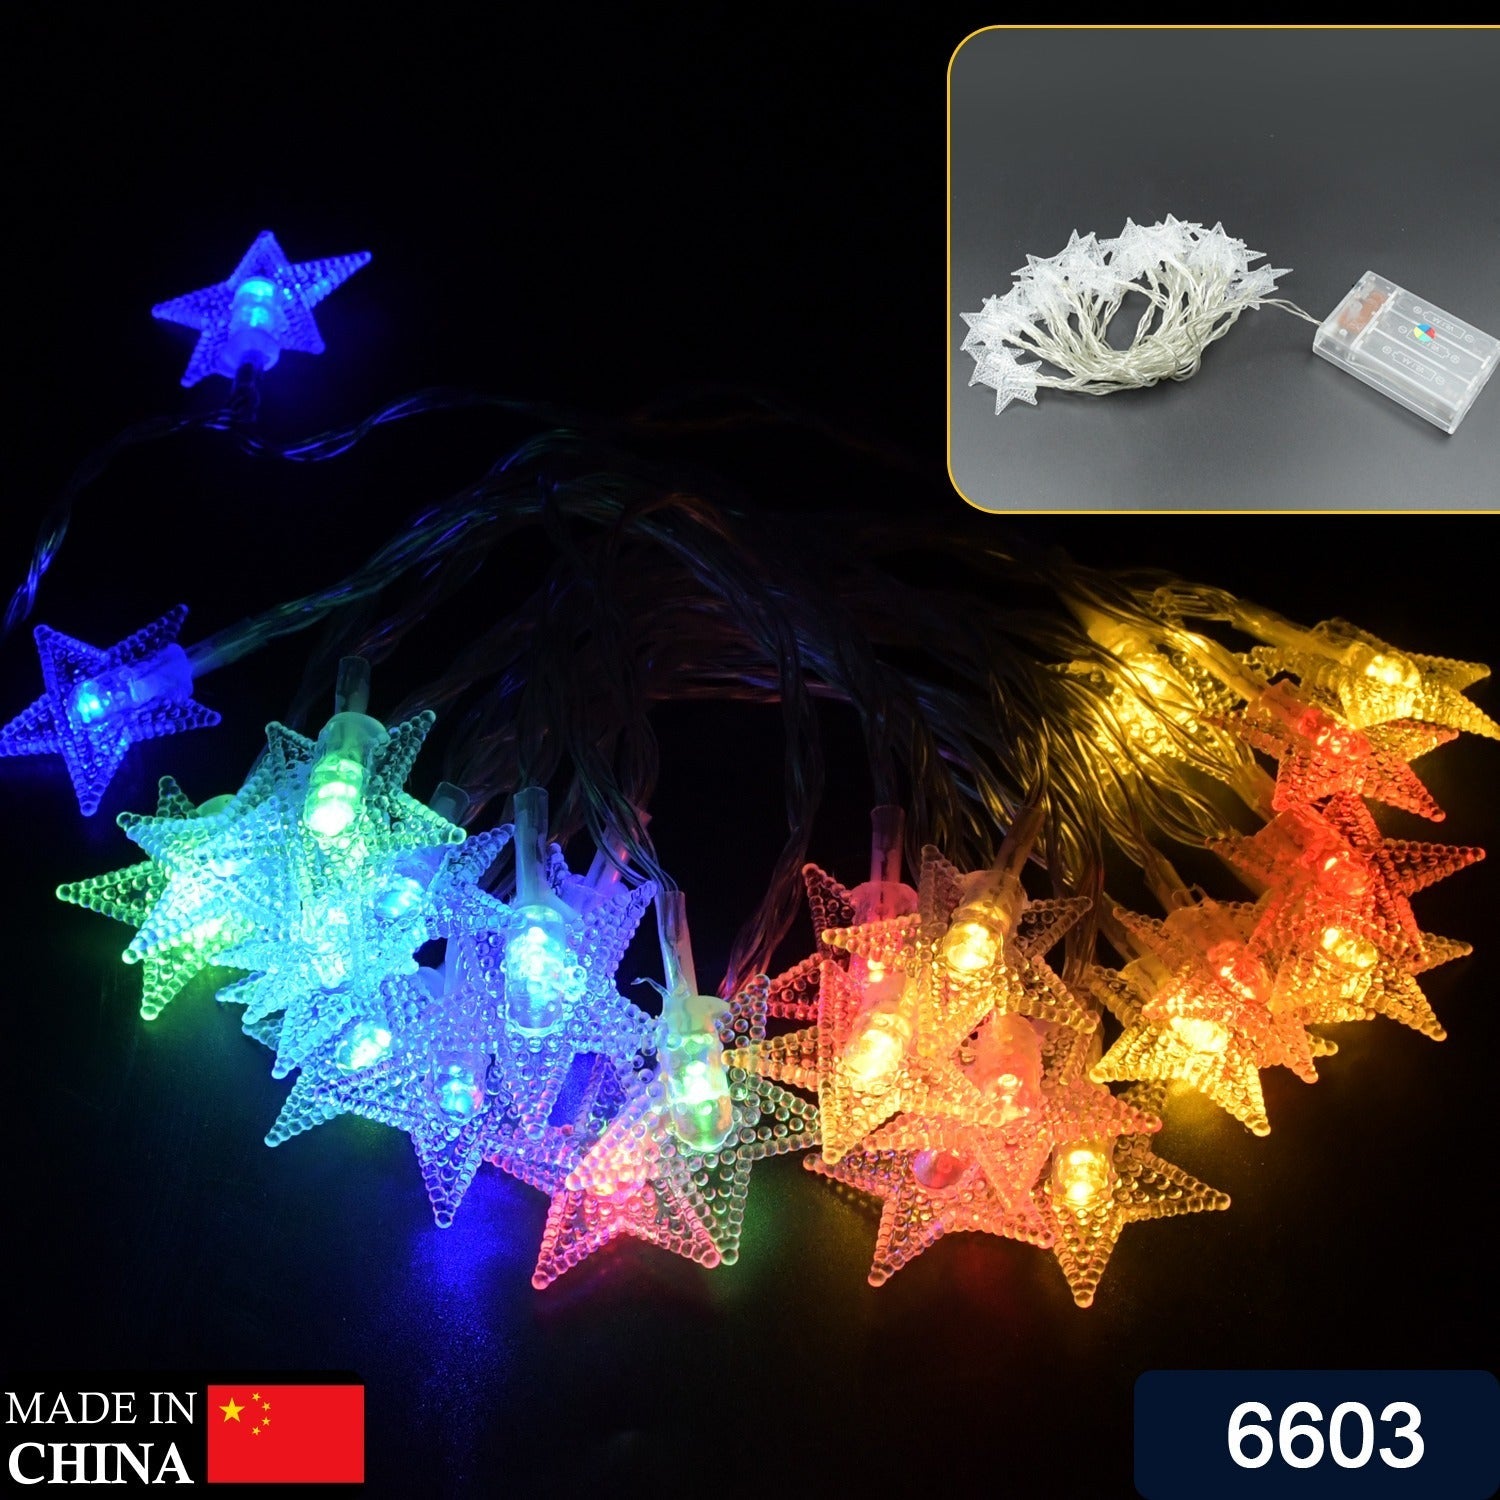 6603  28 LED / Star 3.9 Meter Star Shape Led Light Battery Operated with Flashing Modes for Home Decoration, Kids Room, Waterproof Diwali & Wedding LED Christmas Light Indoor and Outdoor Light ,Festival Decoration (Multicolor Battery Not Included 3.9Mtr) - deal99.in